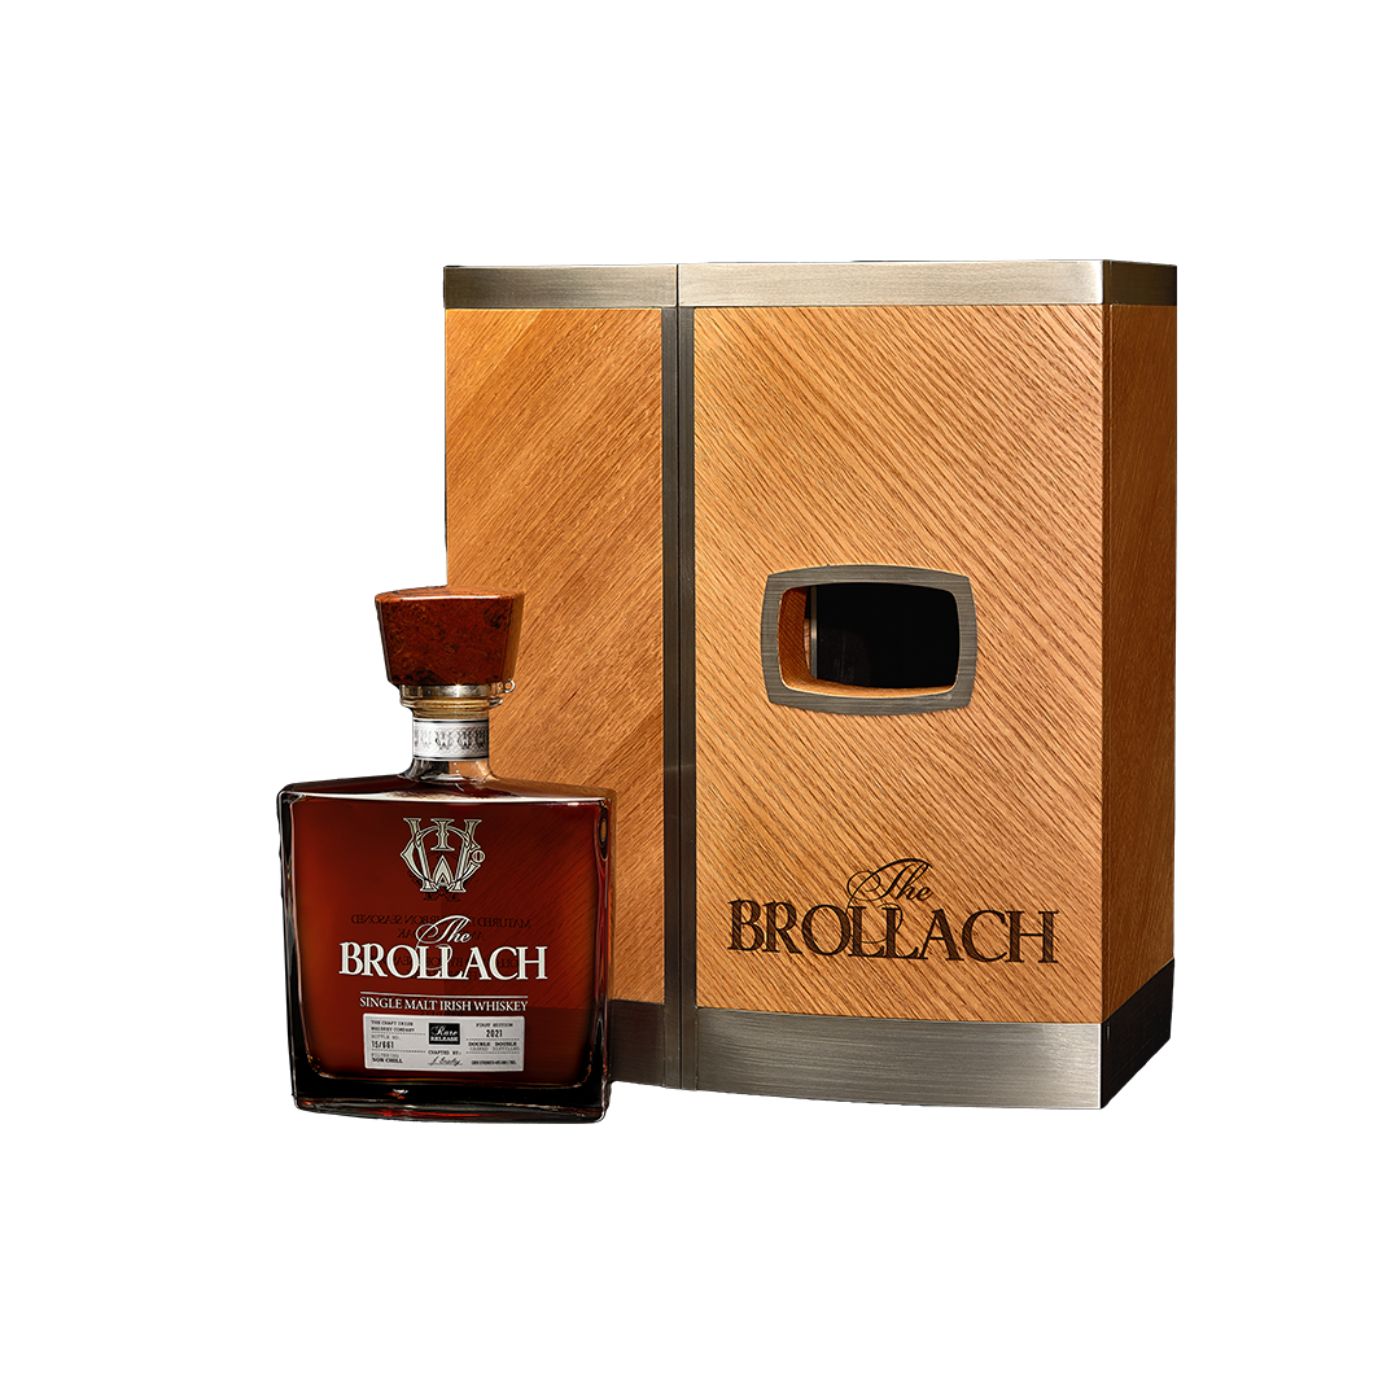 A bottle of The Brollach is a great Irish Whiskey gift idea